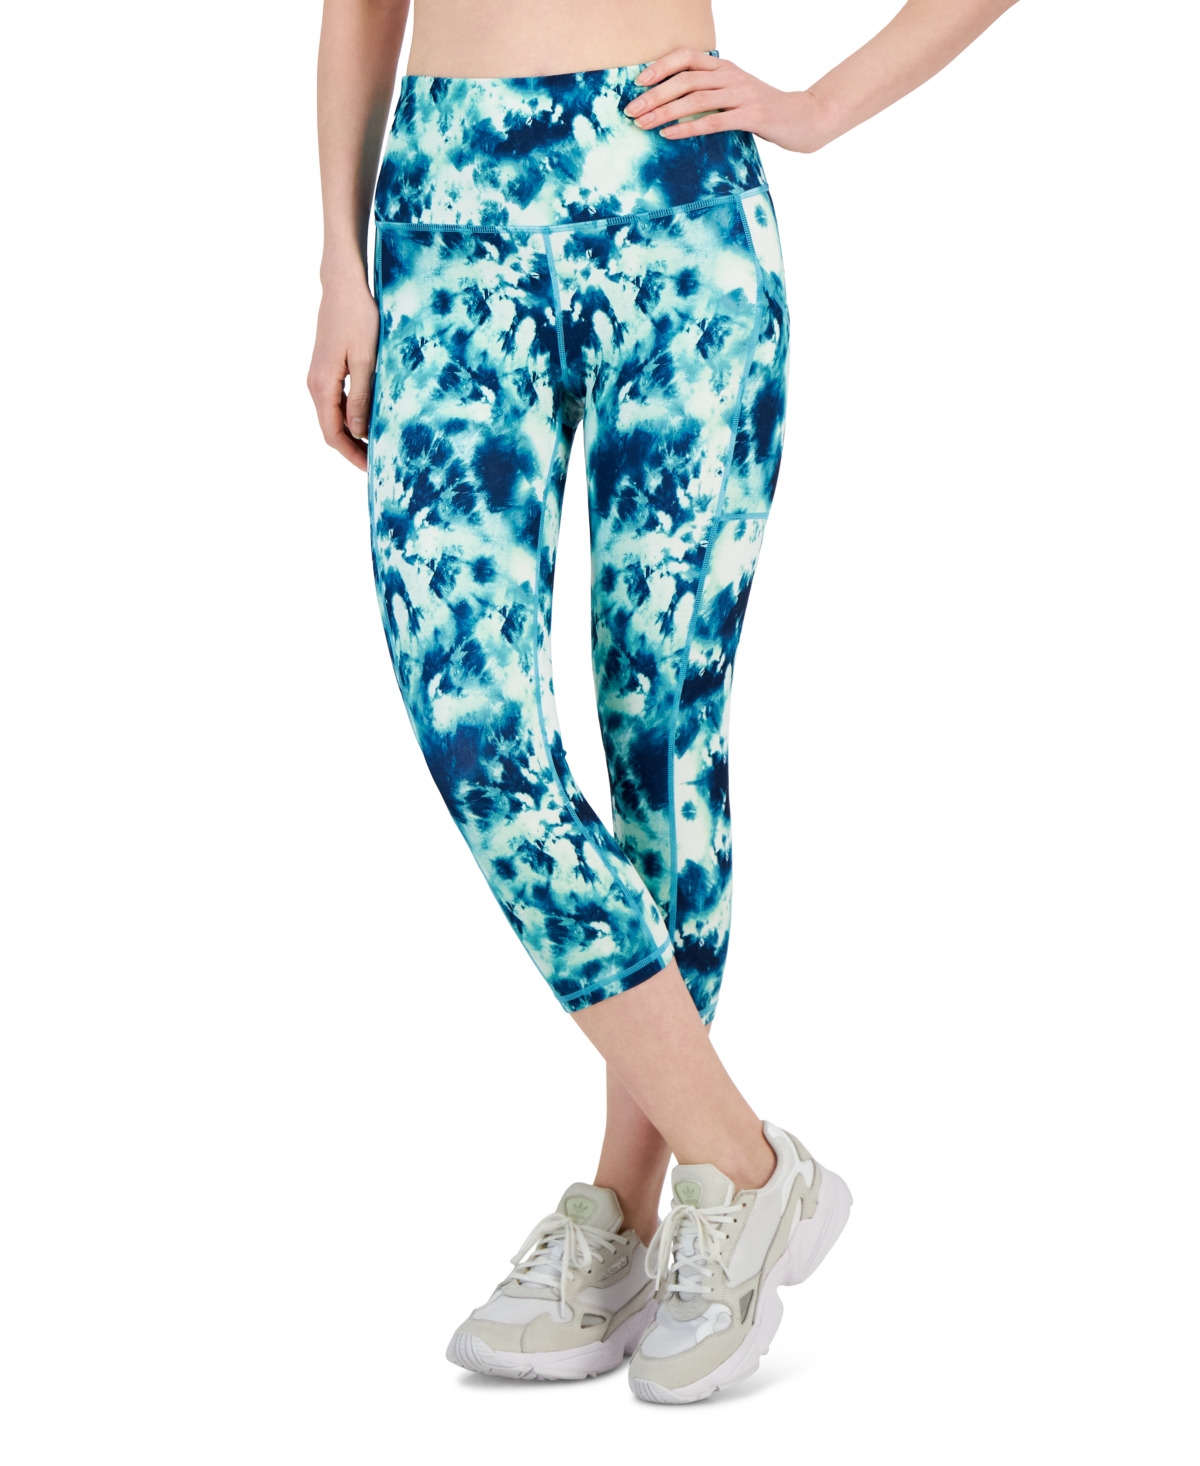 Women's Compression Printed Crop Side-Pocket Leggings, Created for Macy's - Sea Shore